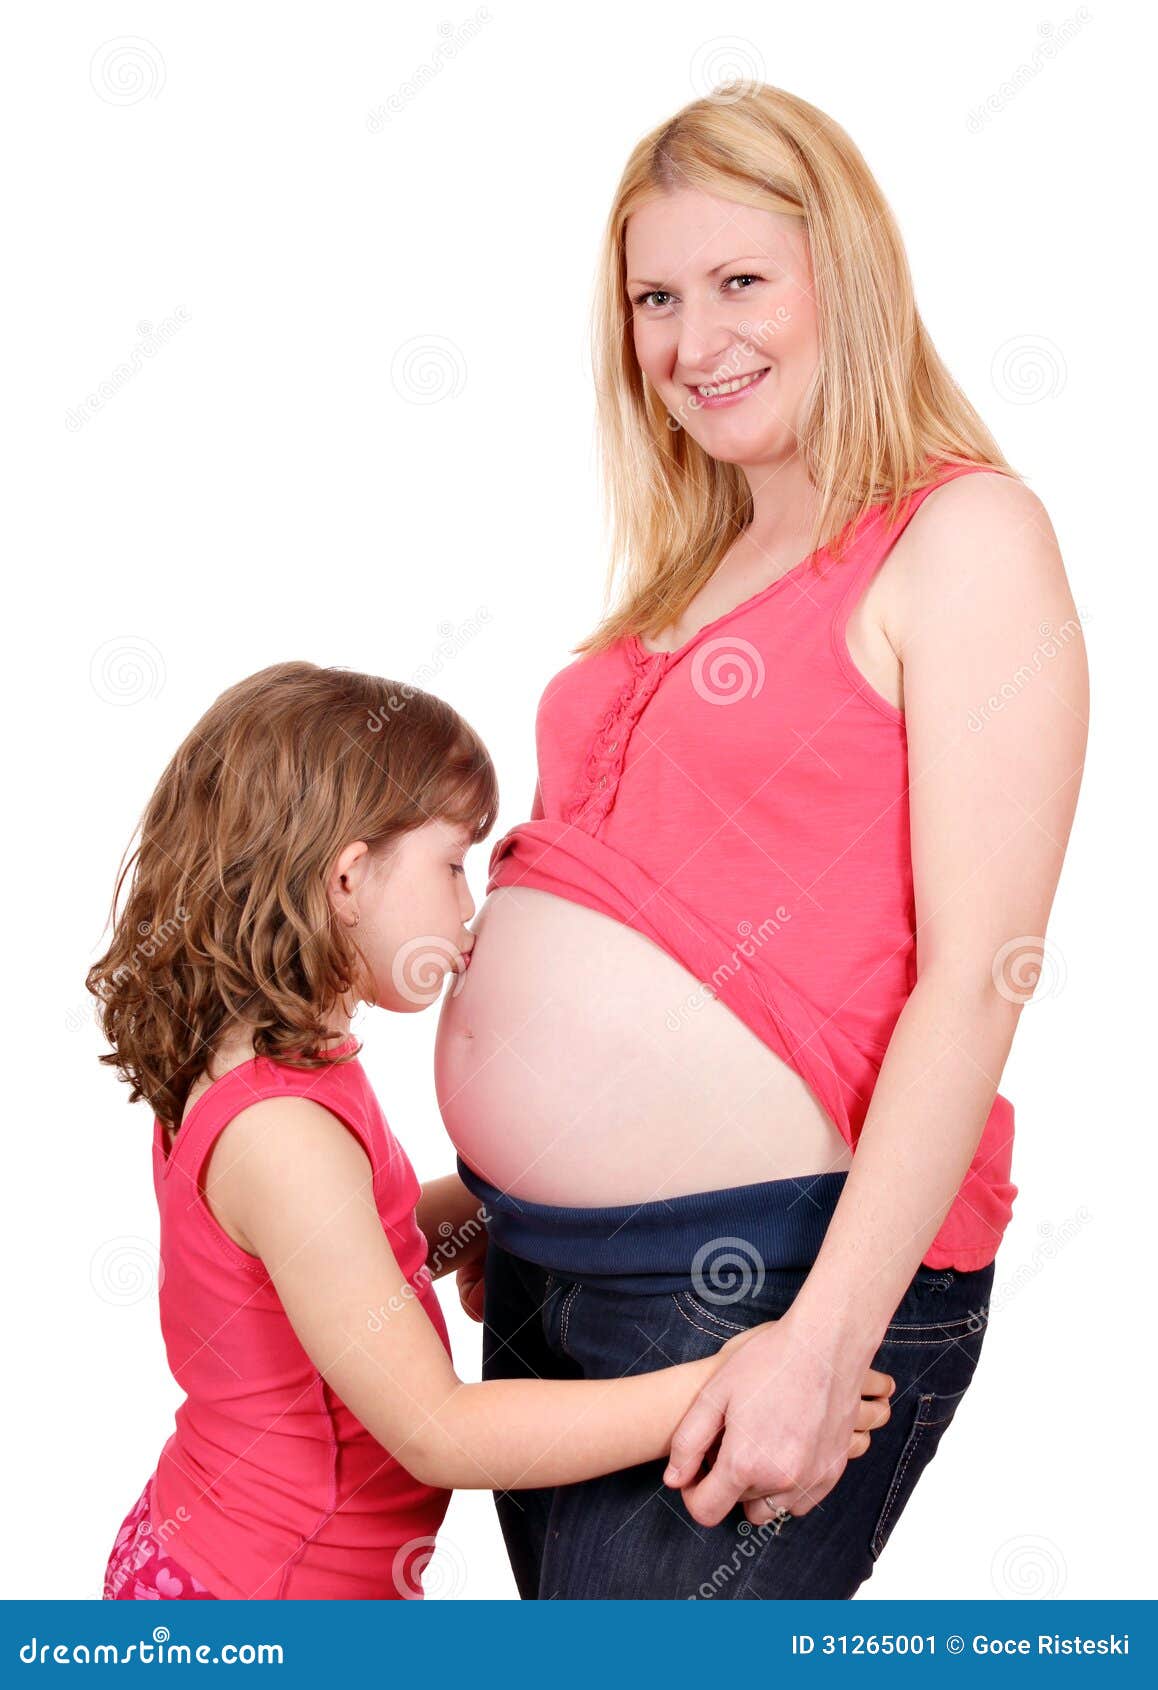 images of pregnant women kissing other women